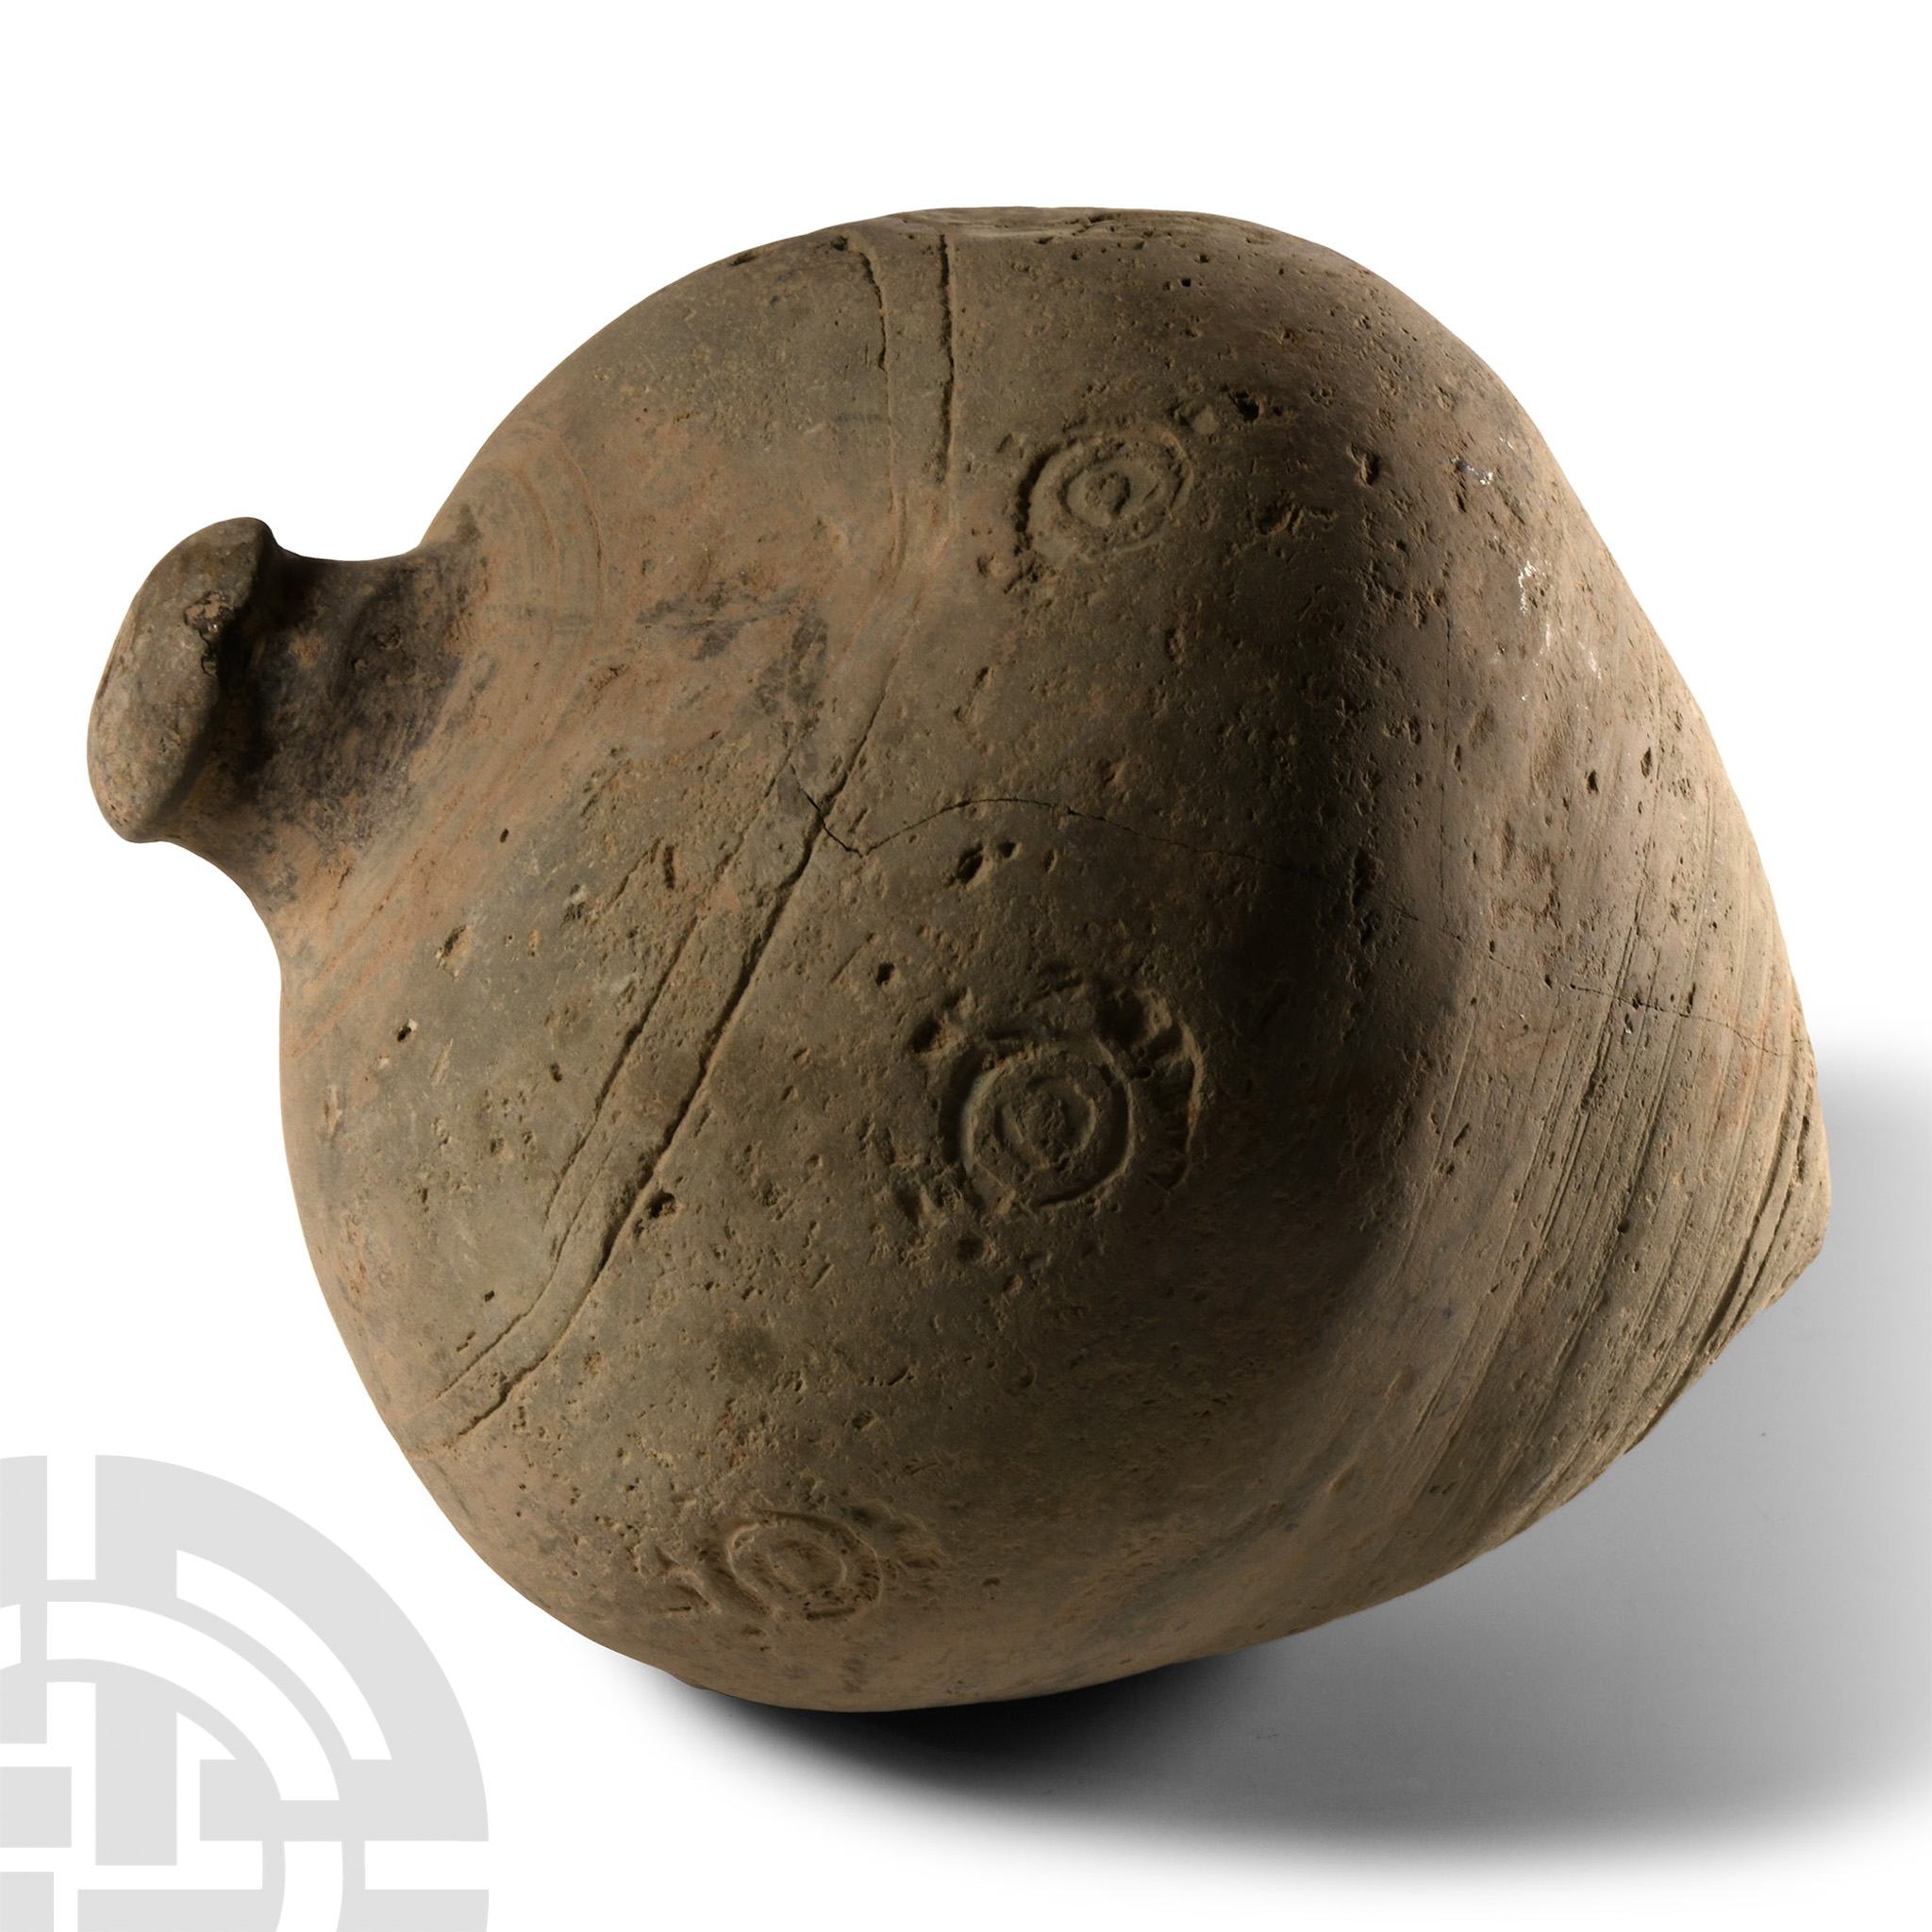 Very Large Byzantine 'Greek Fire' Ceramic Fire Bomb or Hand Grenade